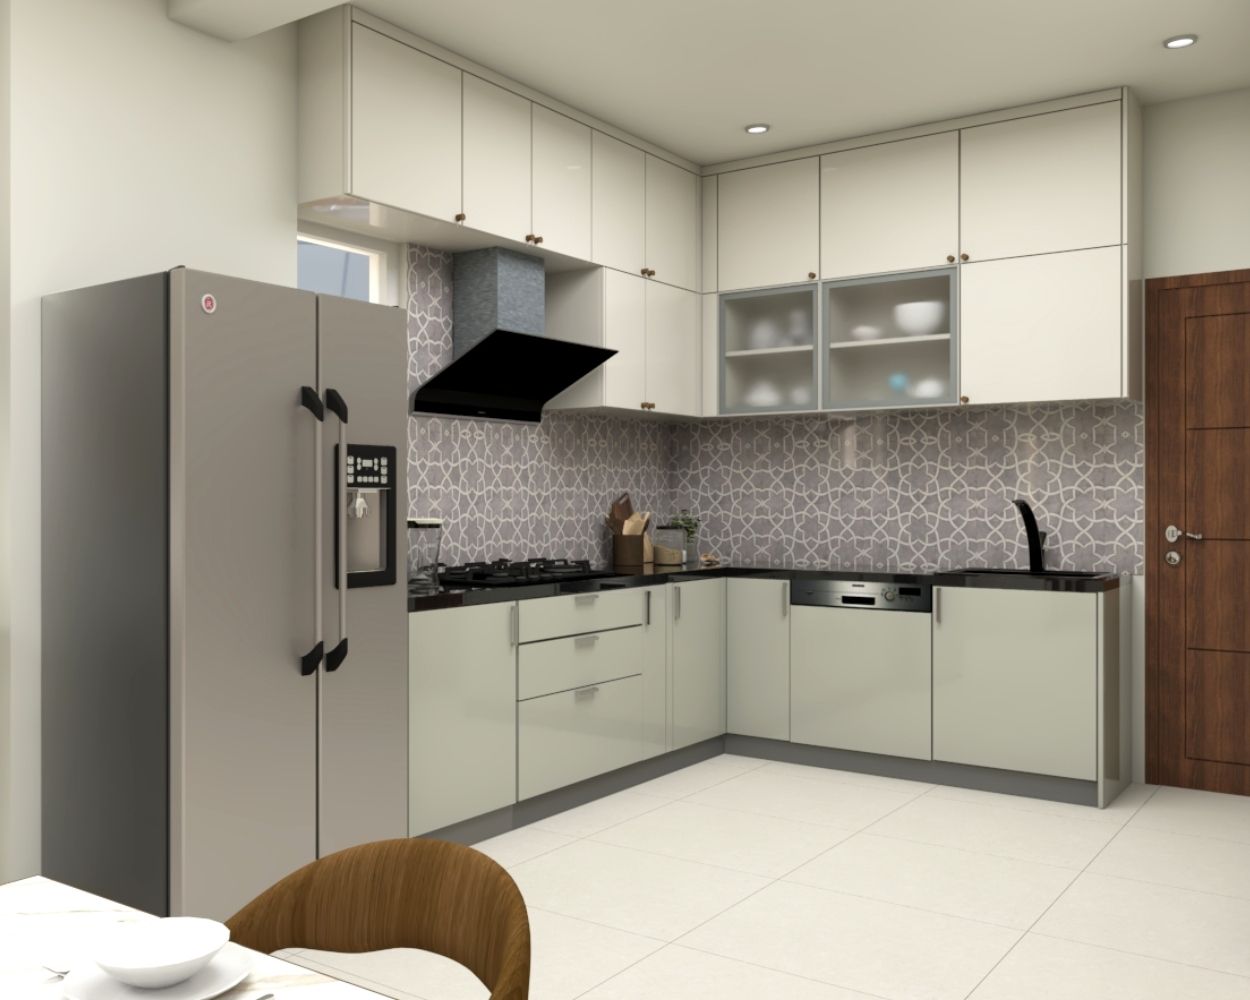 Contemporary Open Kitchen Design With Patterned Grey Dado Tiles